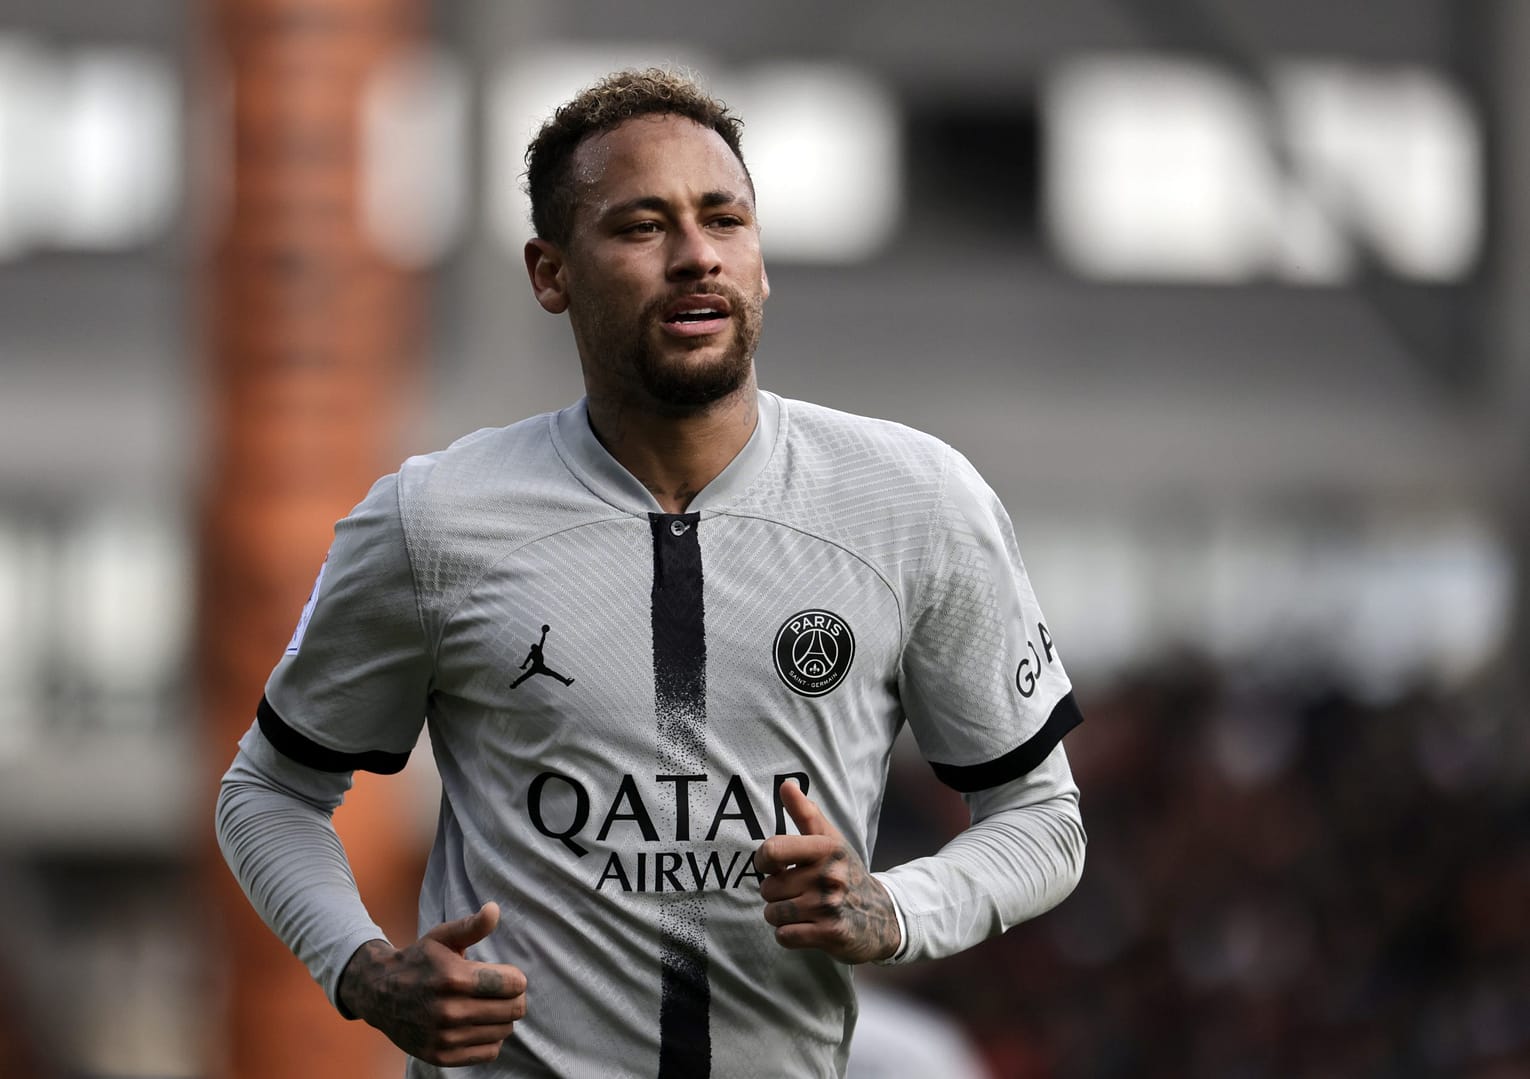 2022 World Cup Prediction & Odds: Can Anyone Stop Neymar or Messi?